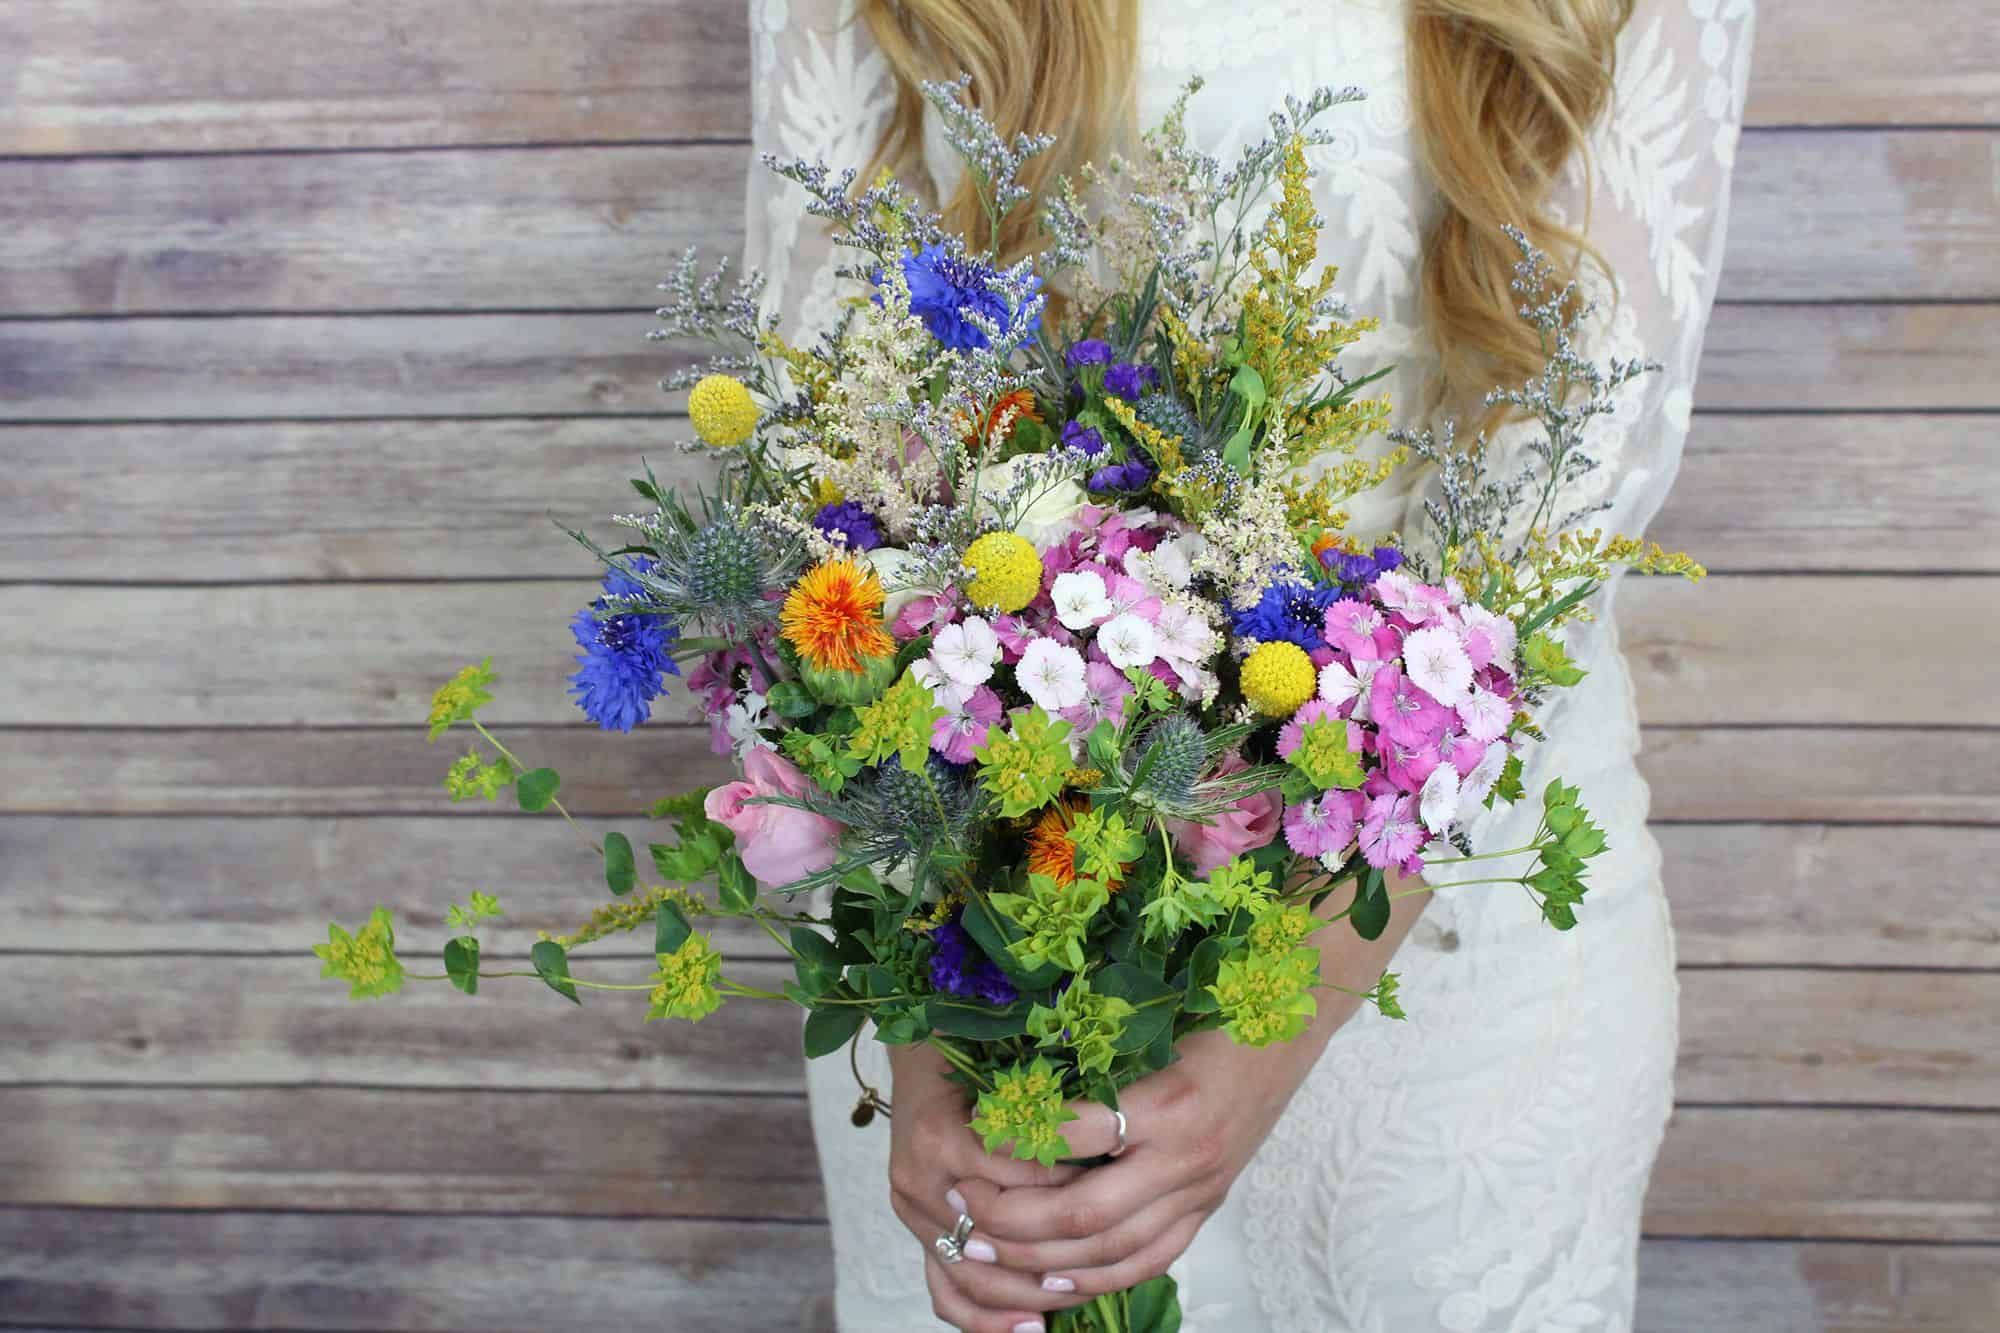 How To Make A Wildflower Bridal Bouquet